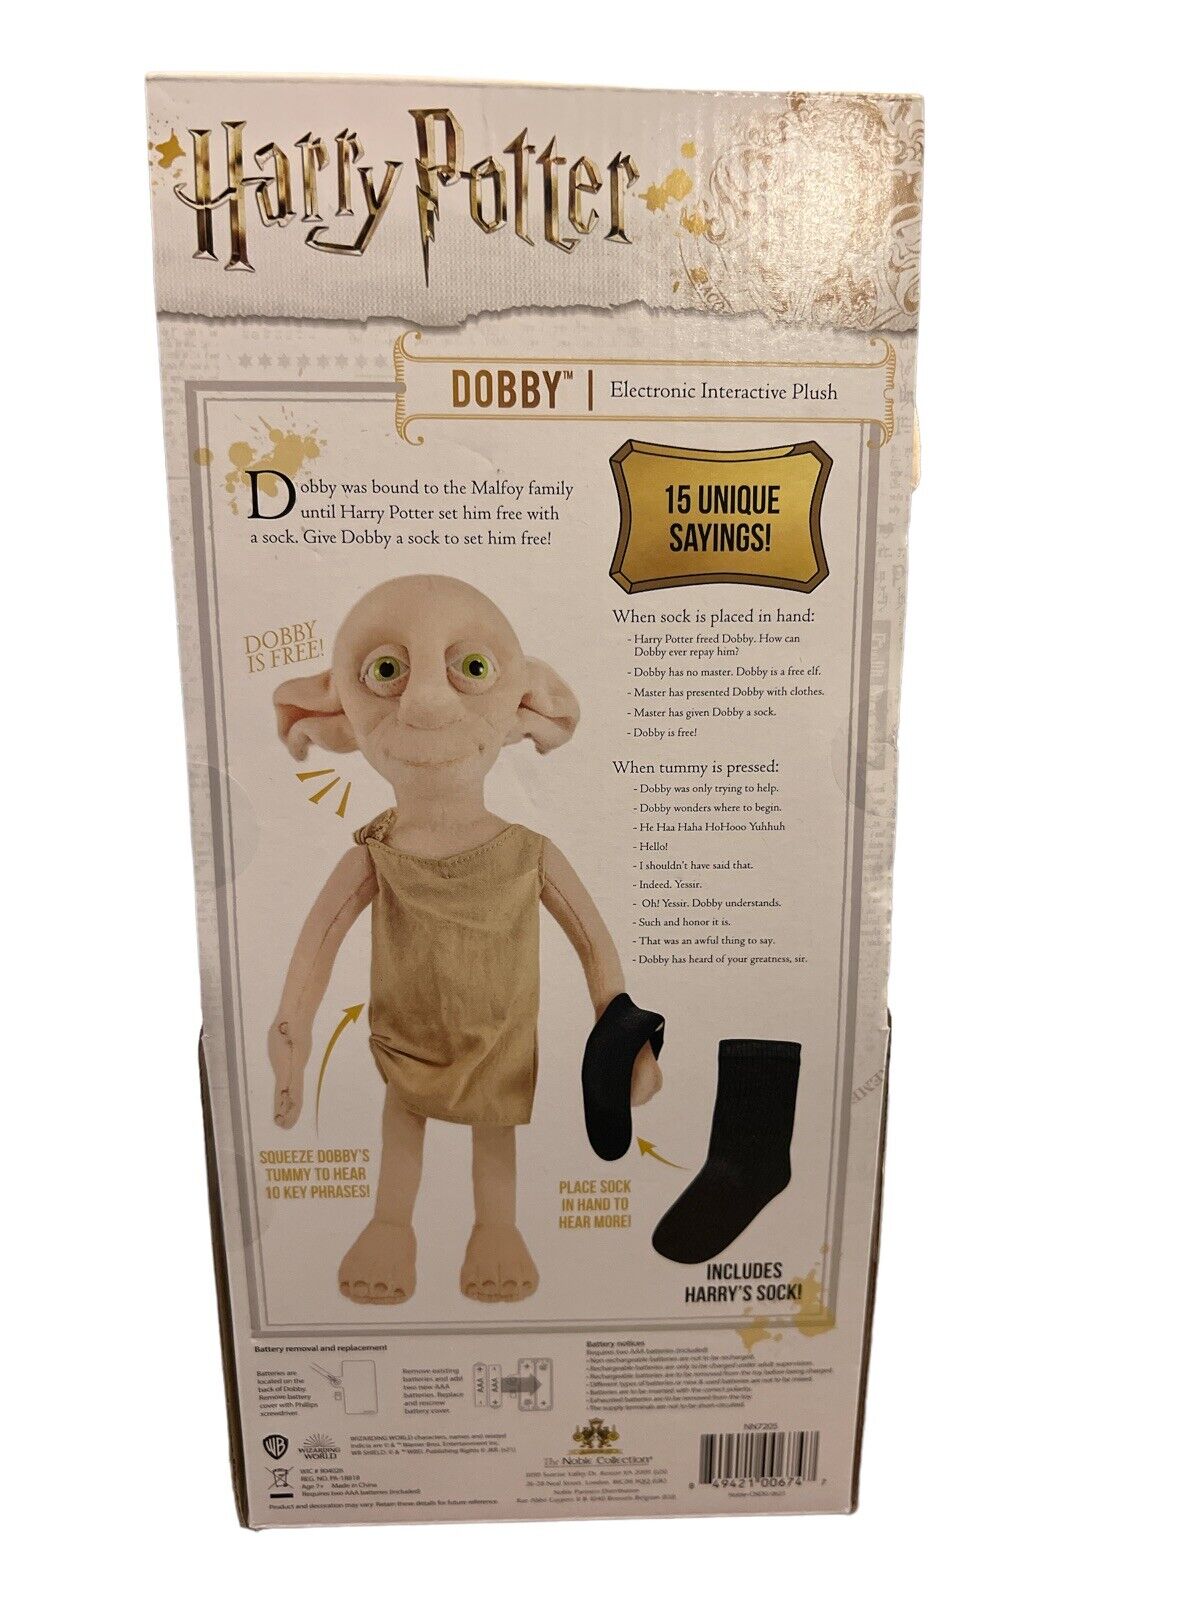 HARRY POTTER INTERACTIVE TALKING DOBBY THE FREE ELF SOFT PLUSH TOY